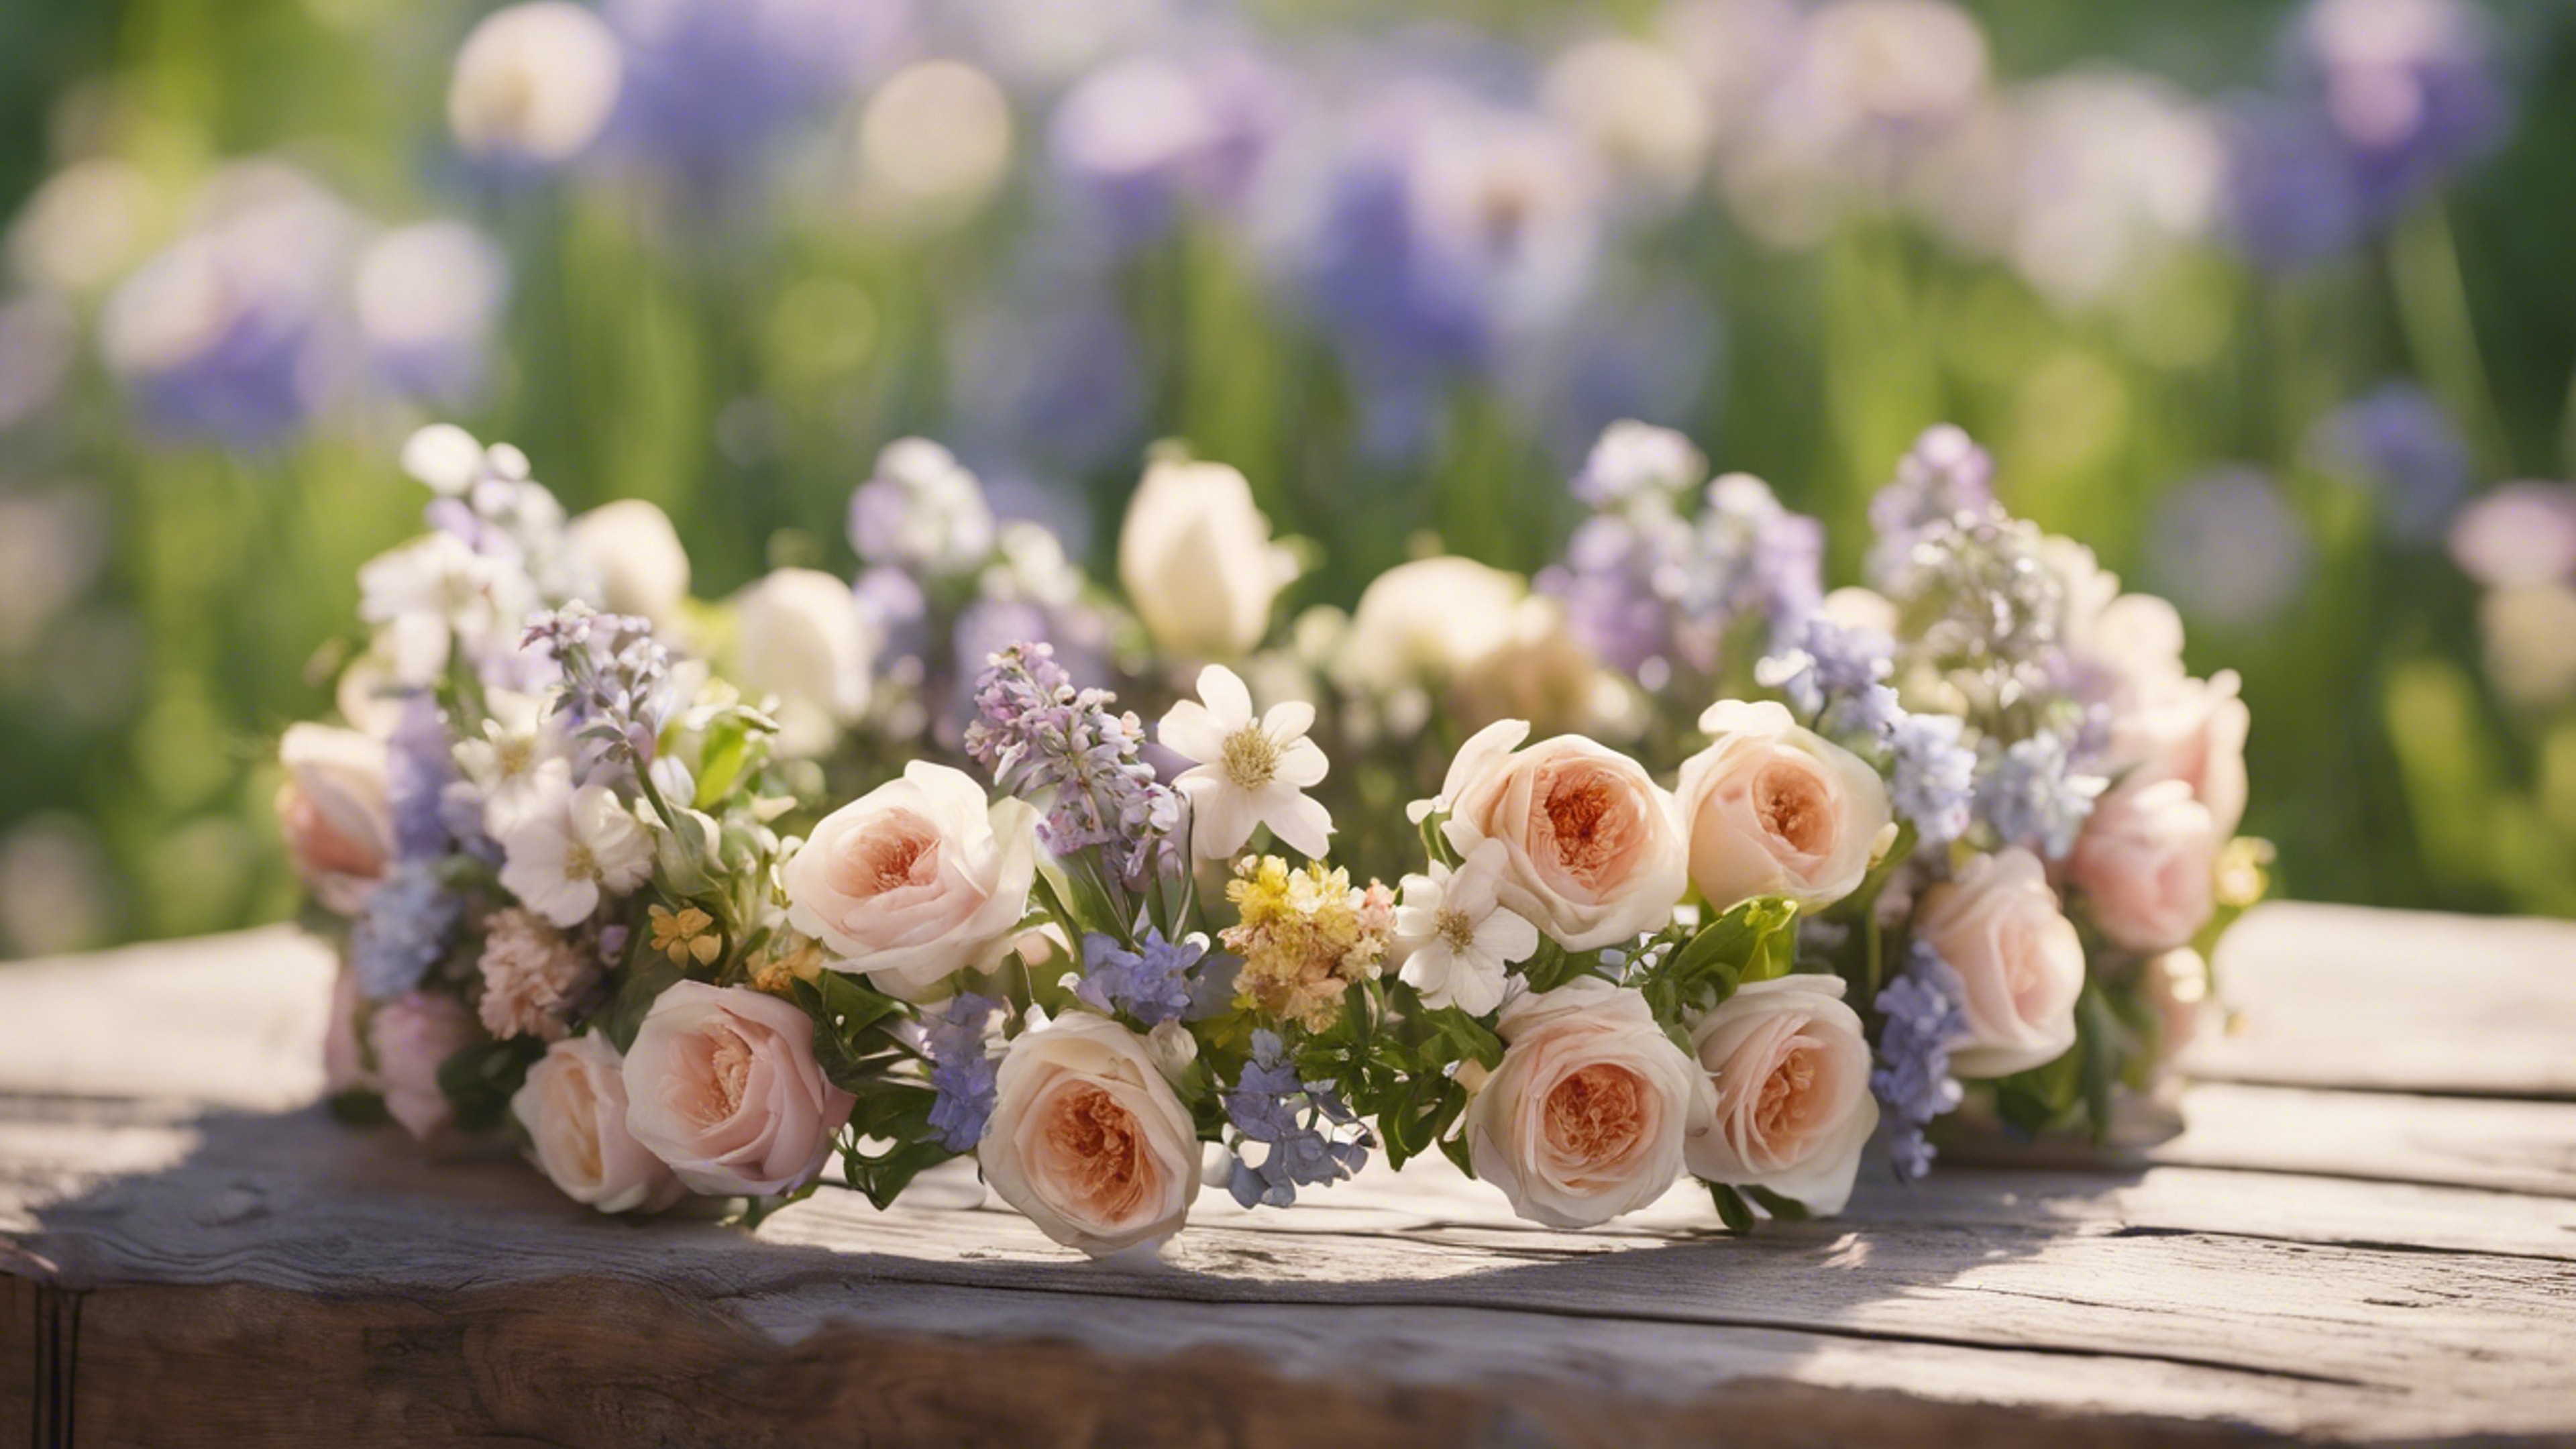 A crown made of fresh spring flowers on a wooden table outdoors. Hintergrund[d5115d6a32bf47389ae3]